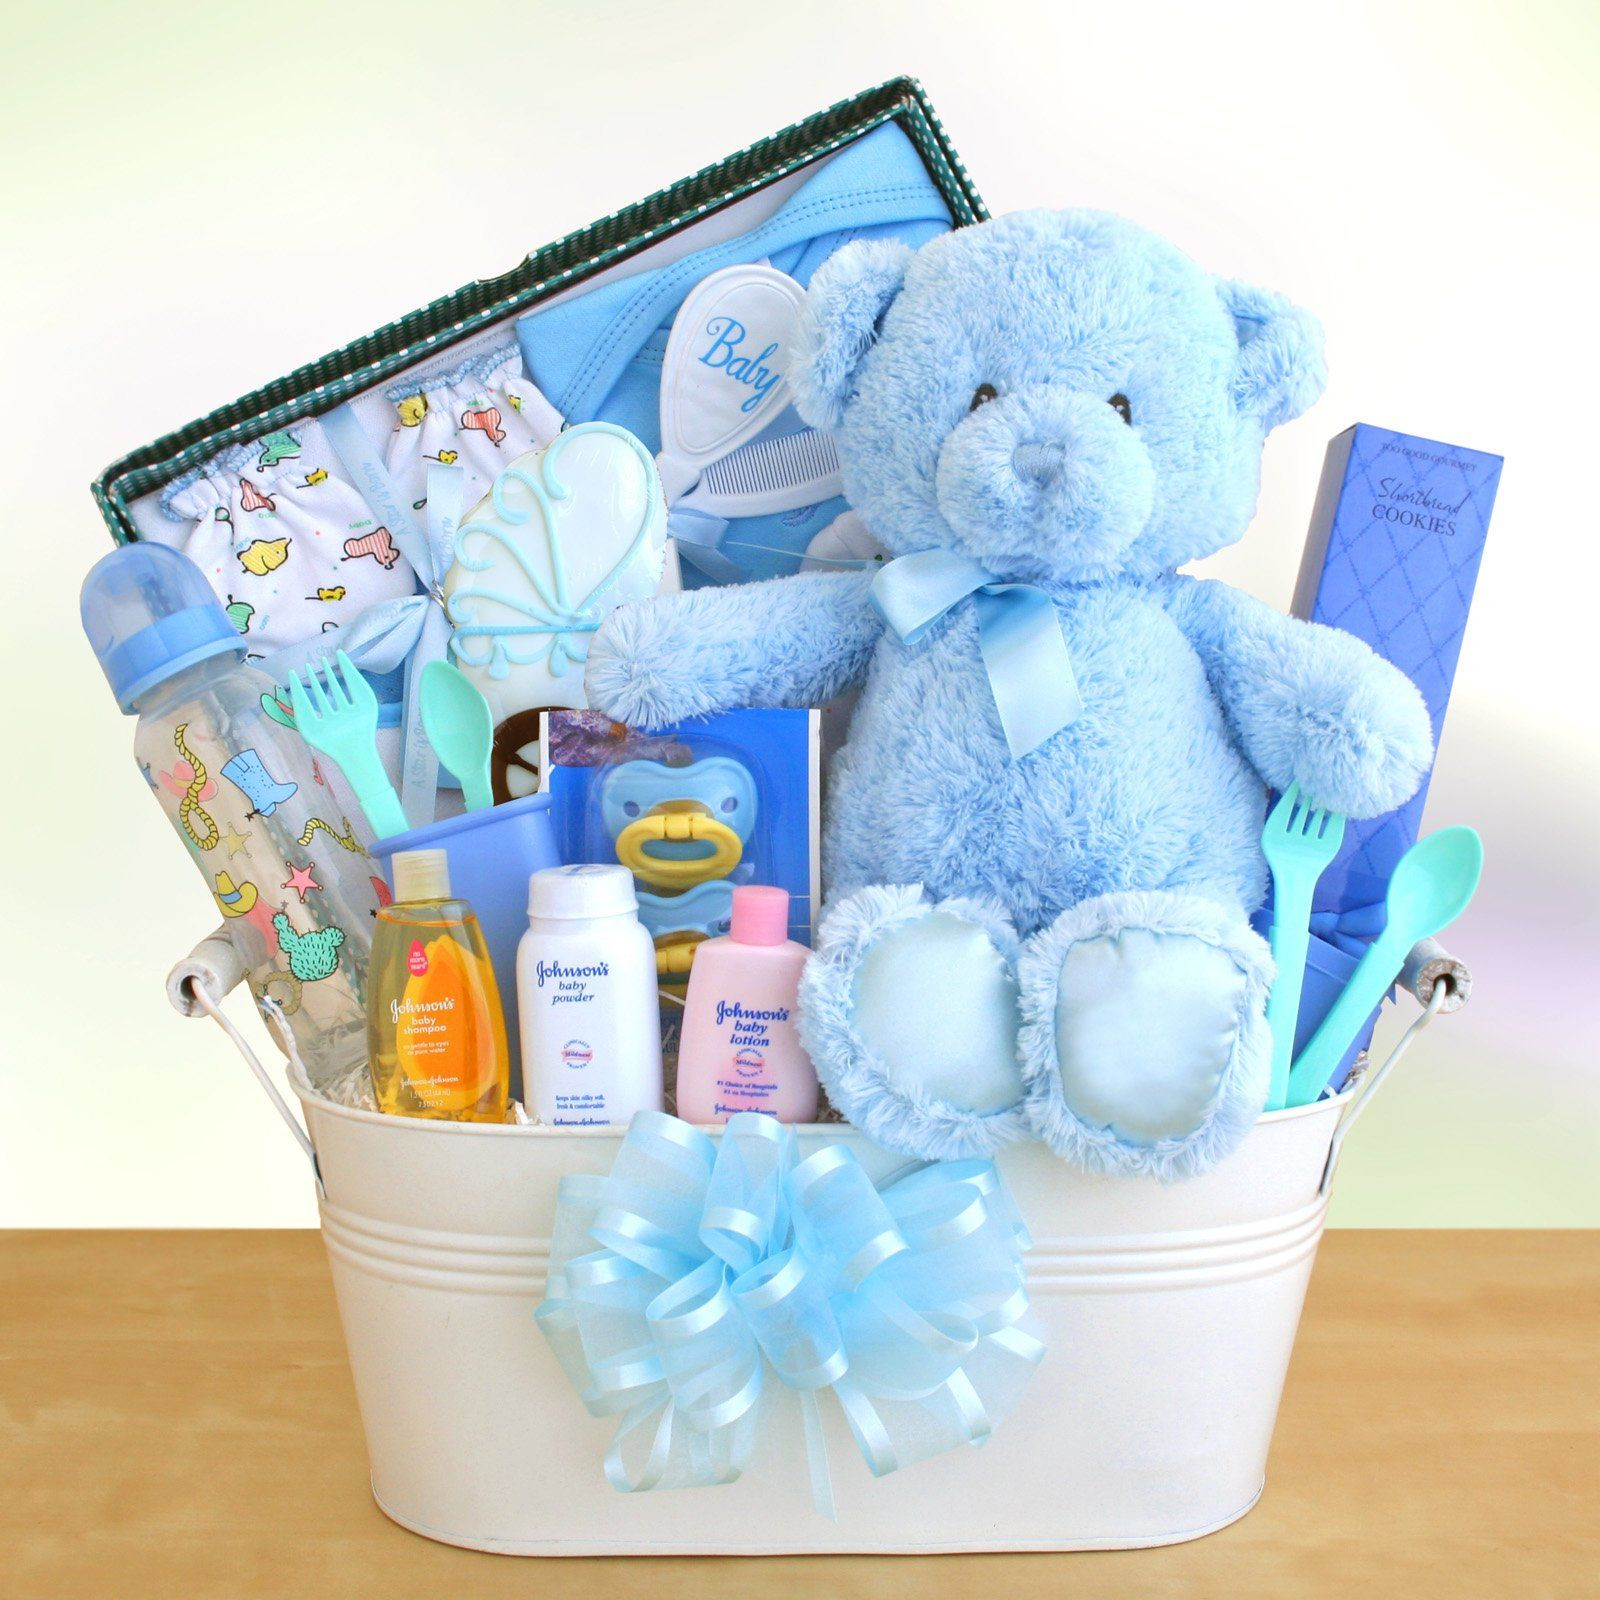 DIY Baby Boy Gift
 Have to have it New Arrival Baby Boy Gift Basket $78 99